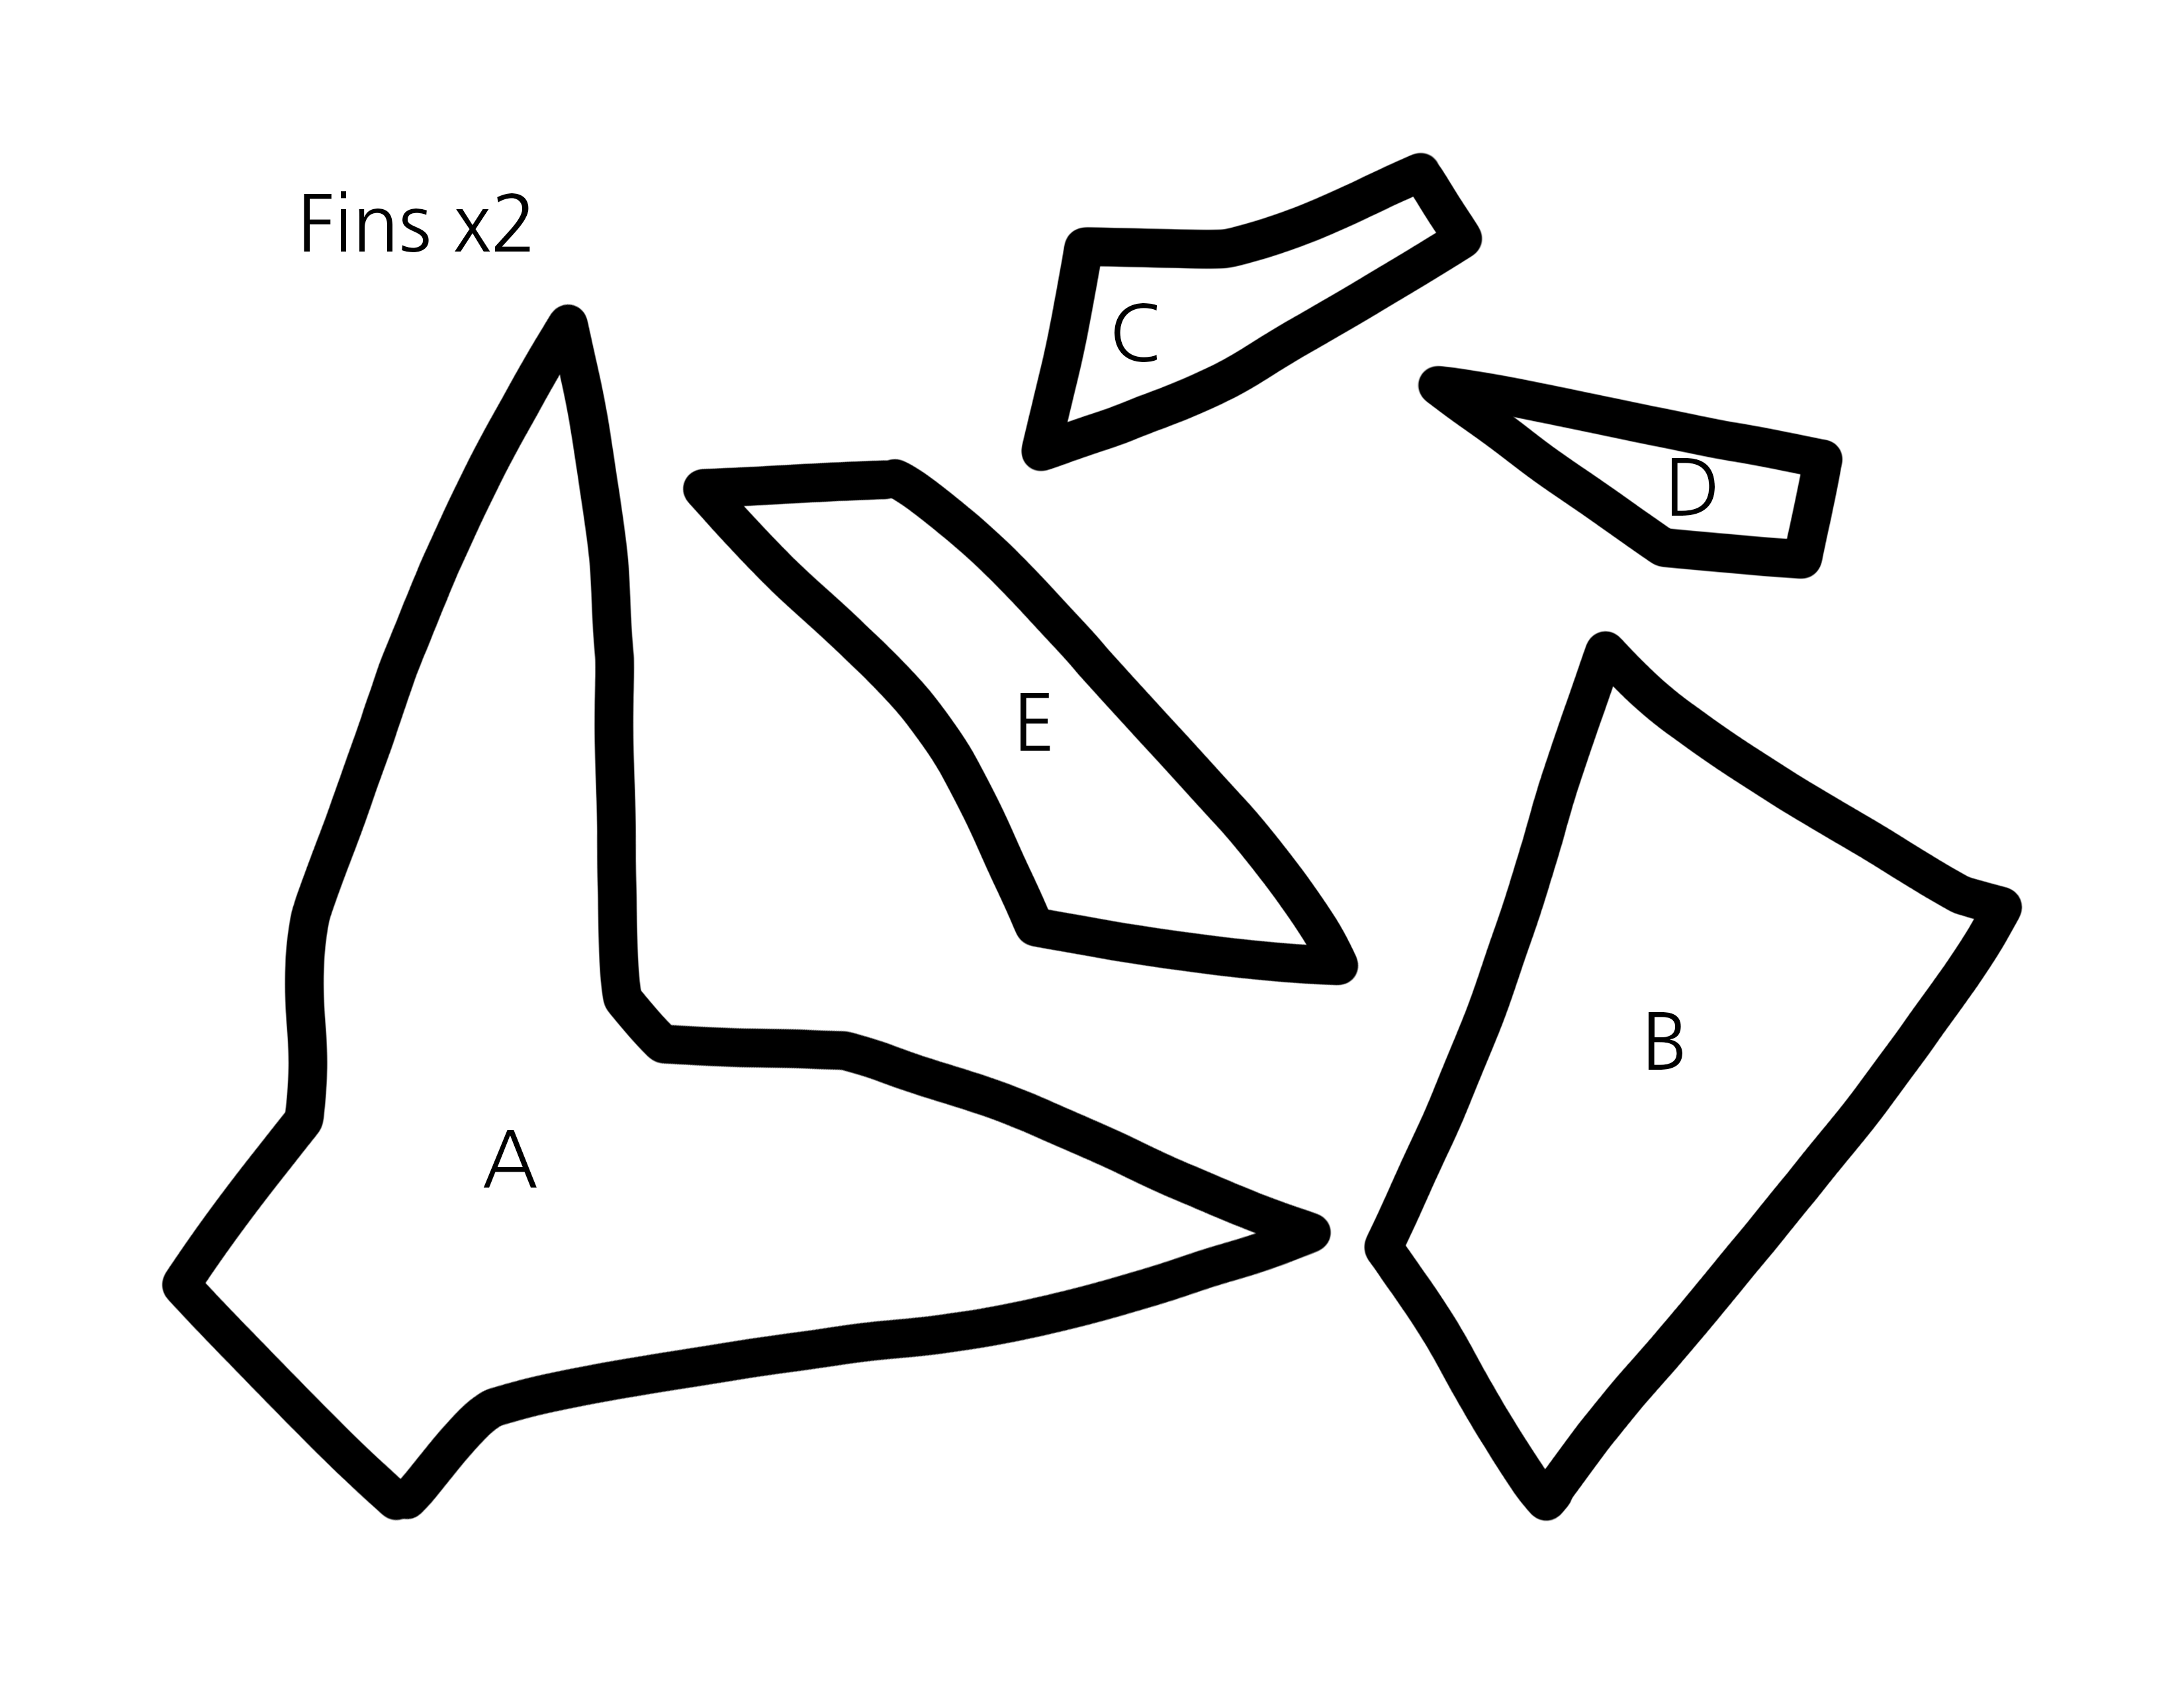 Sewing pattern for the fins of a fish.